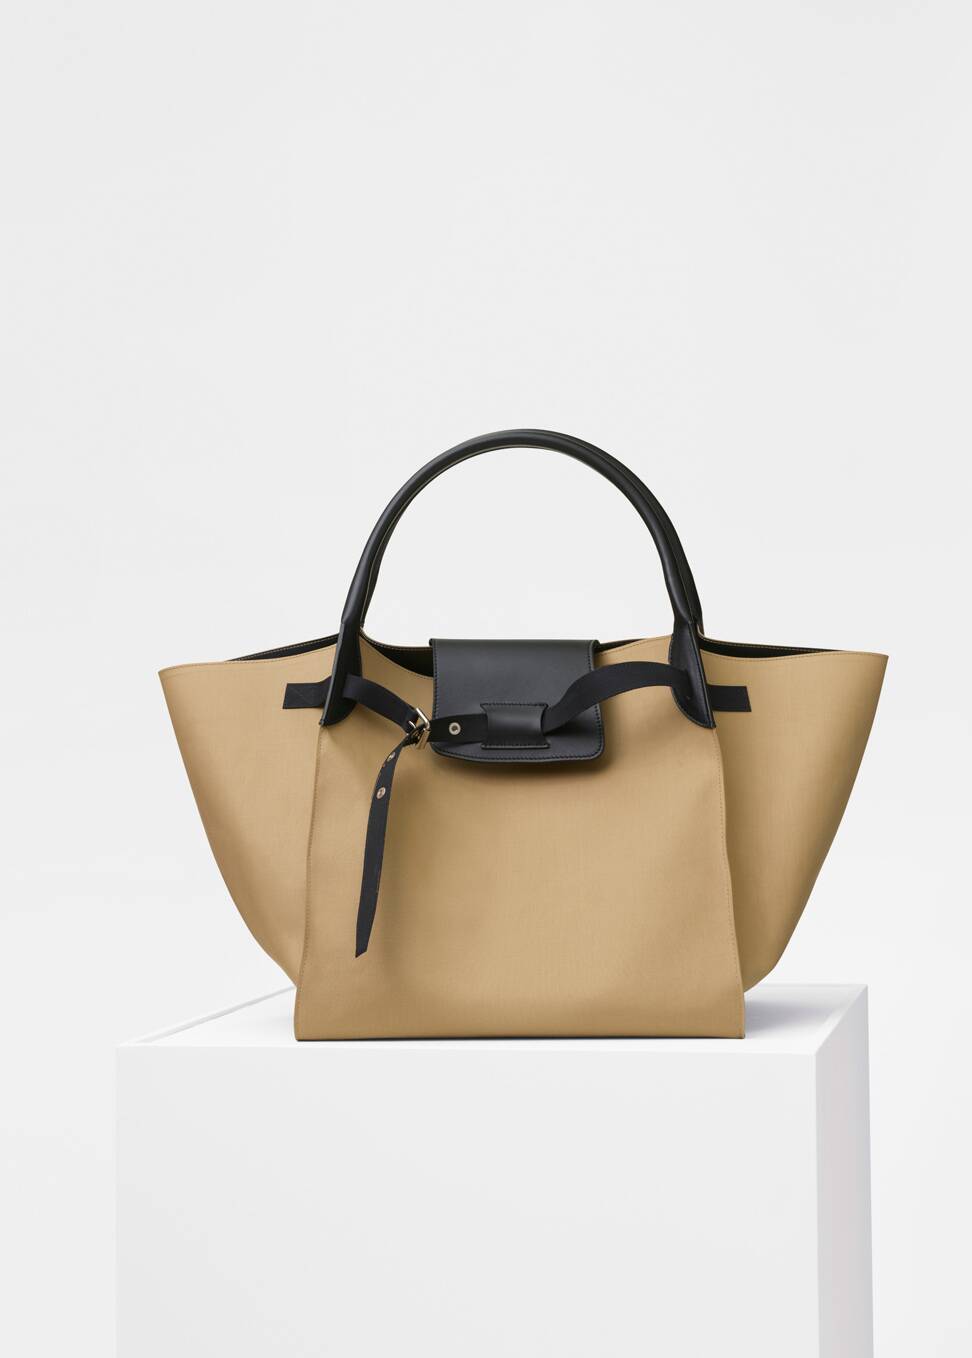 Céline, high-end ready-to-wear, shoes - Fashion & Leather ...